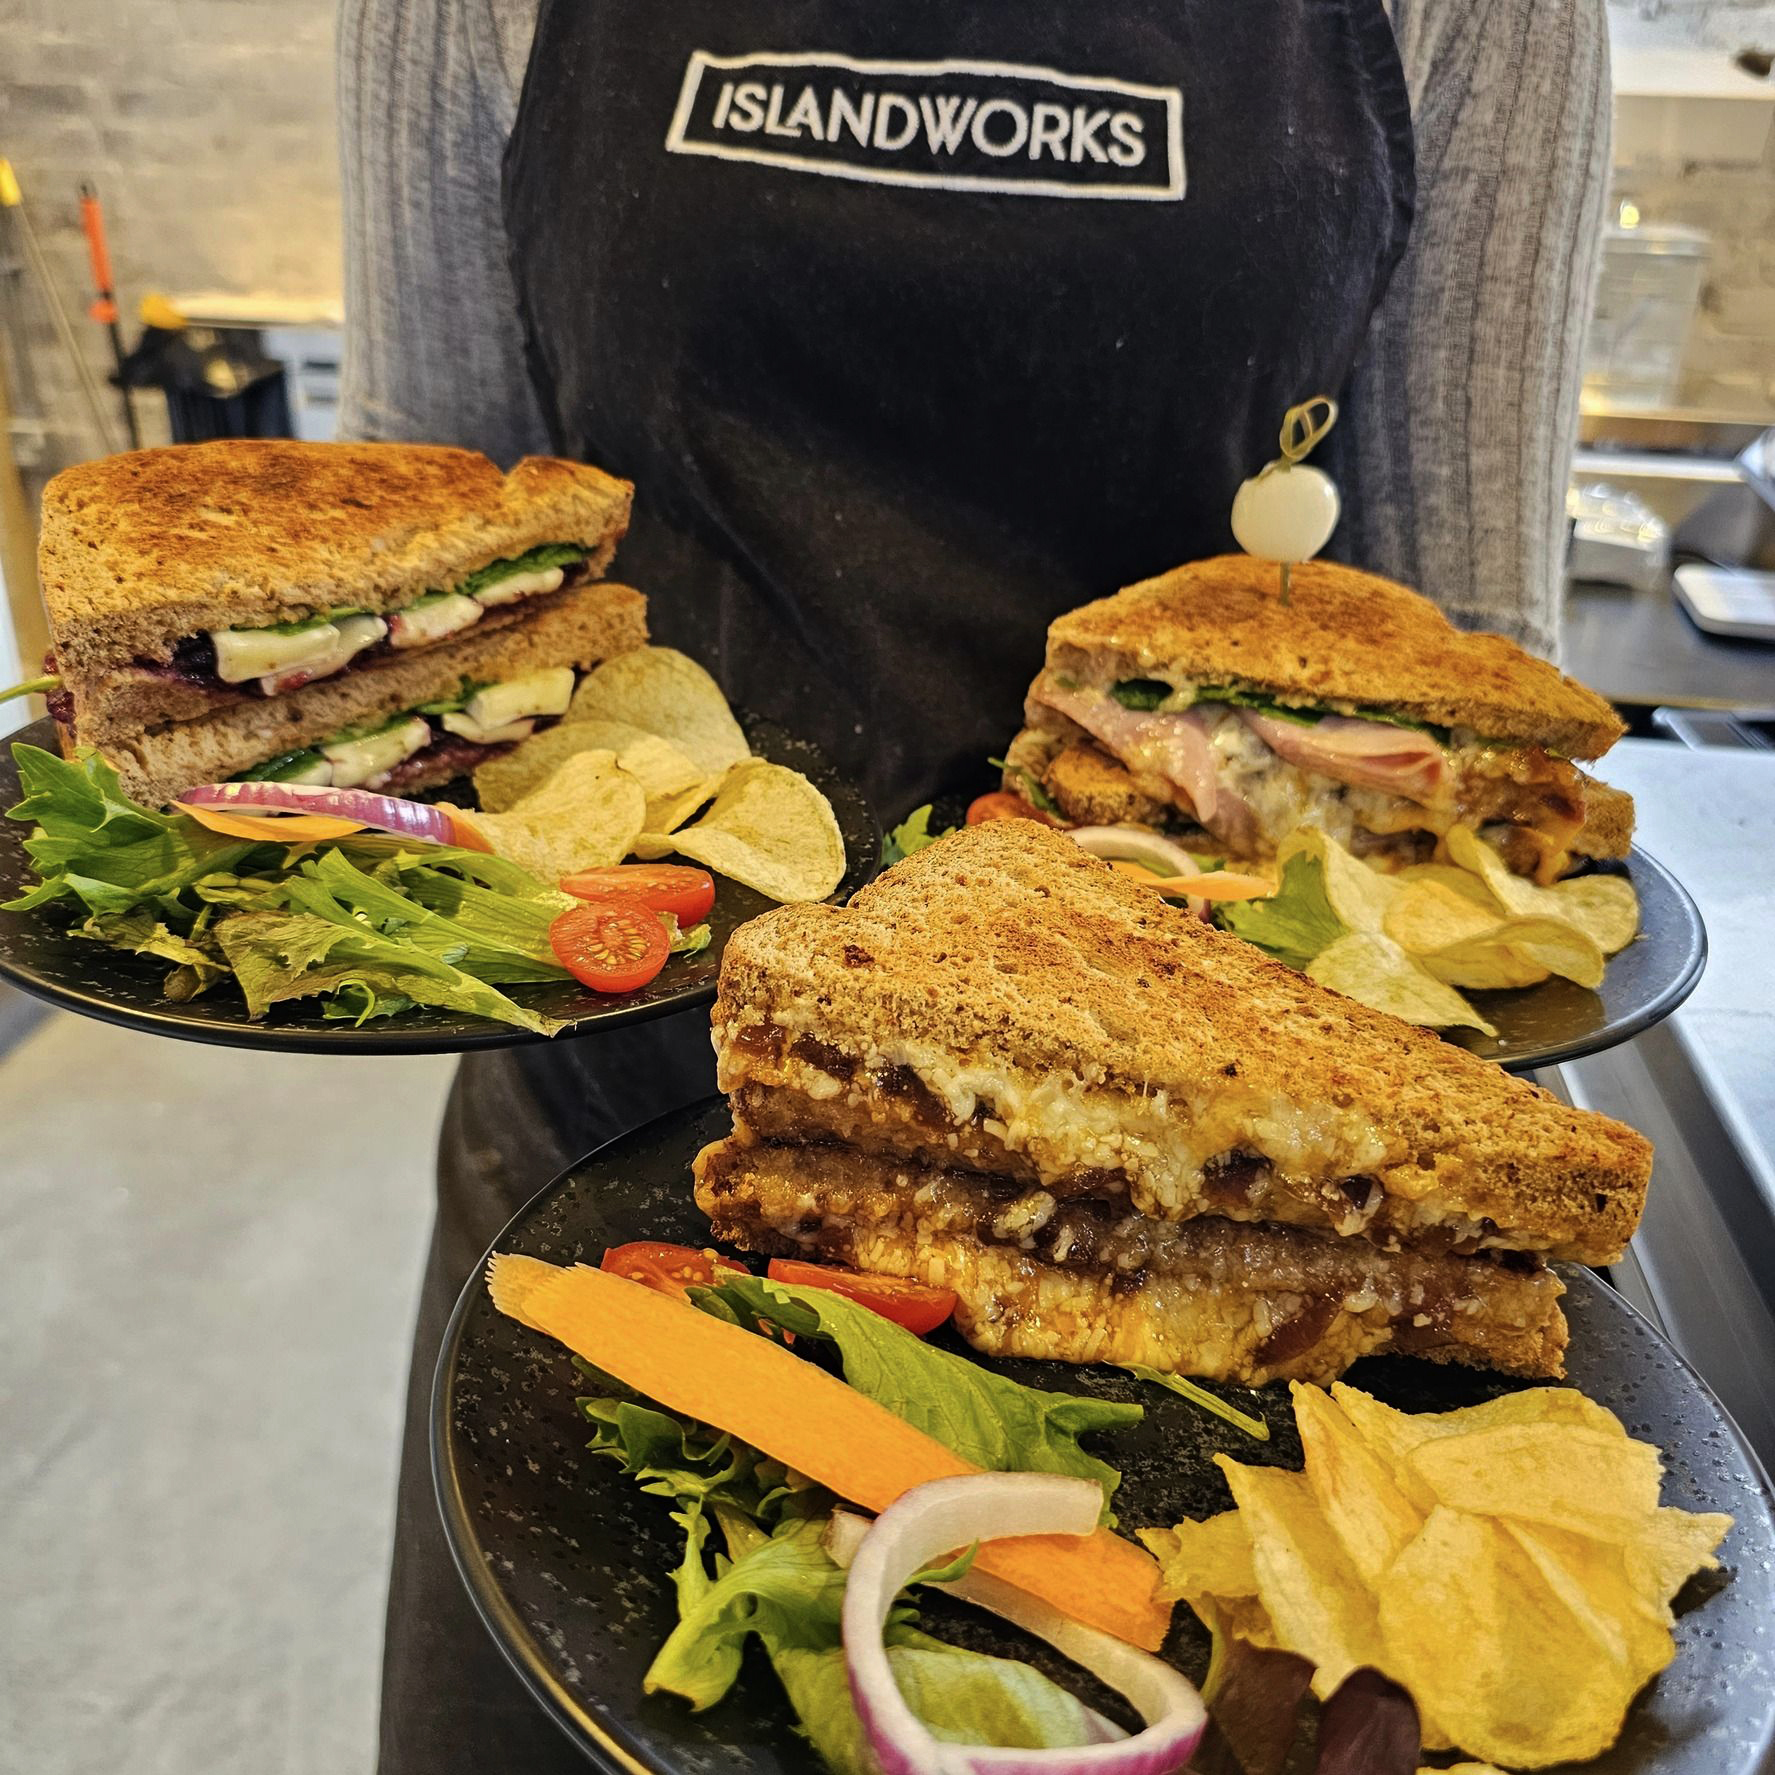 A photo of 3 freshly-made sandwiches available at IslandWorks, featured left to right; Brie & Cranberry, Chicken, Chorizo & Pesto, and Ploughman's with Plum Chutney.